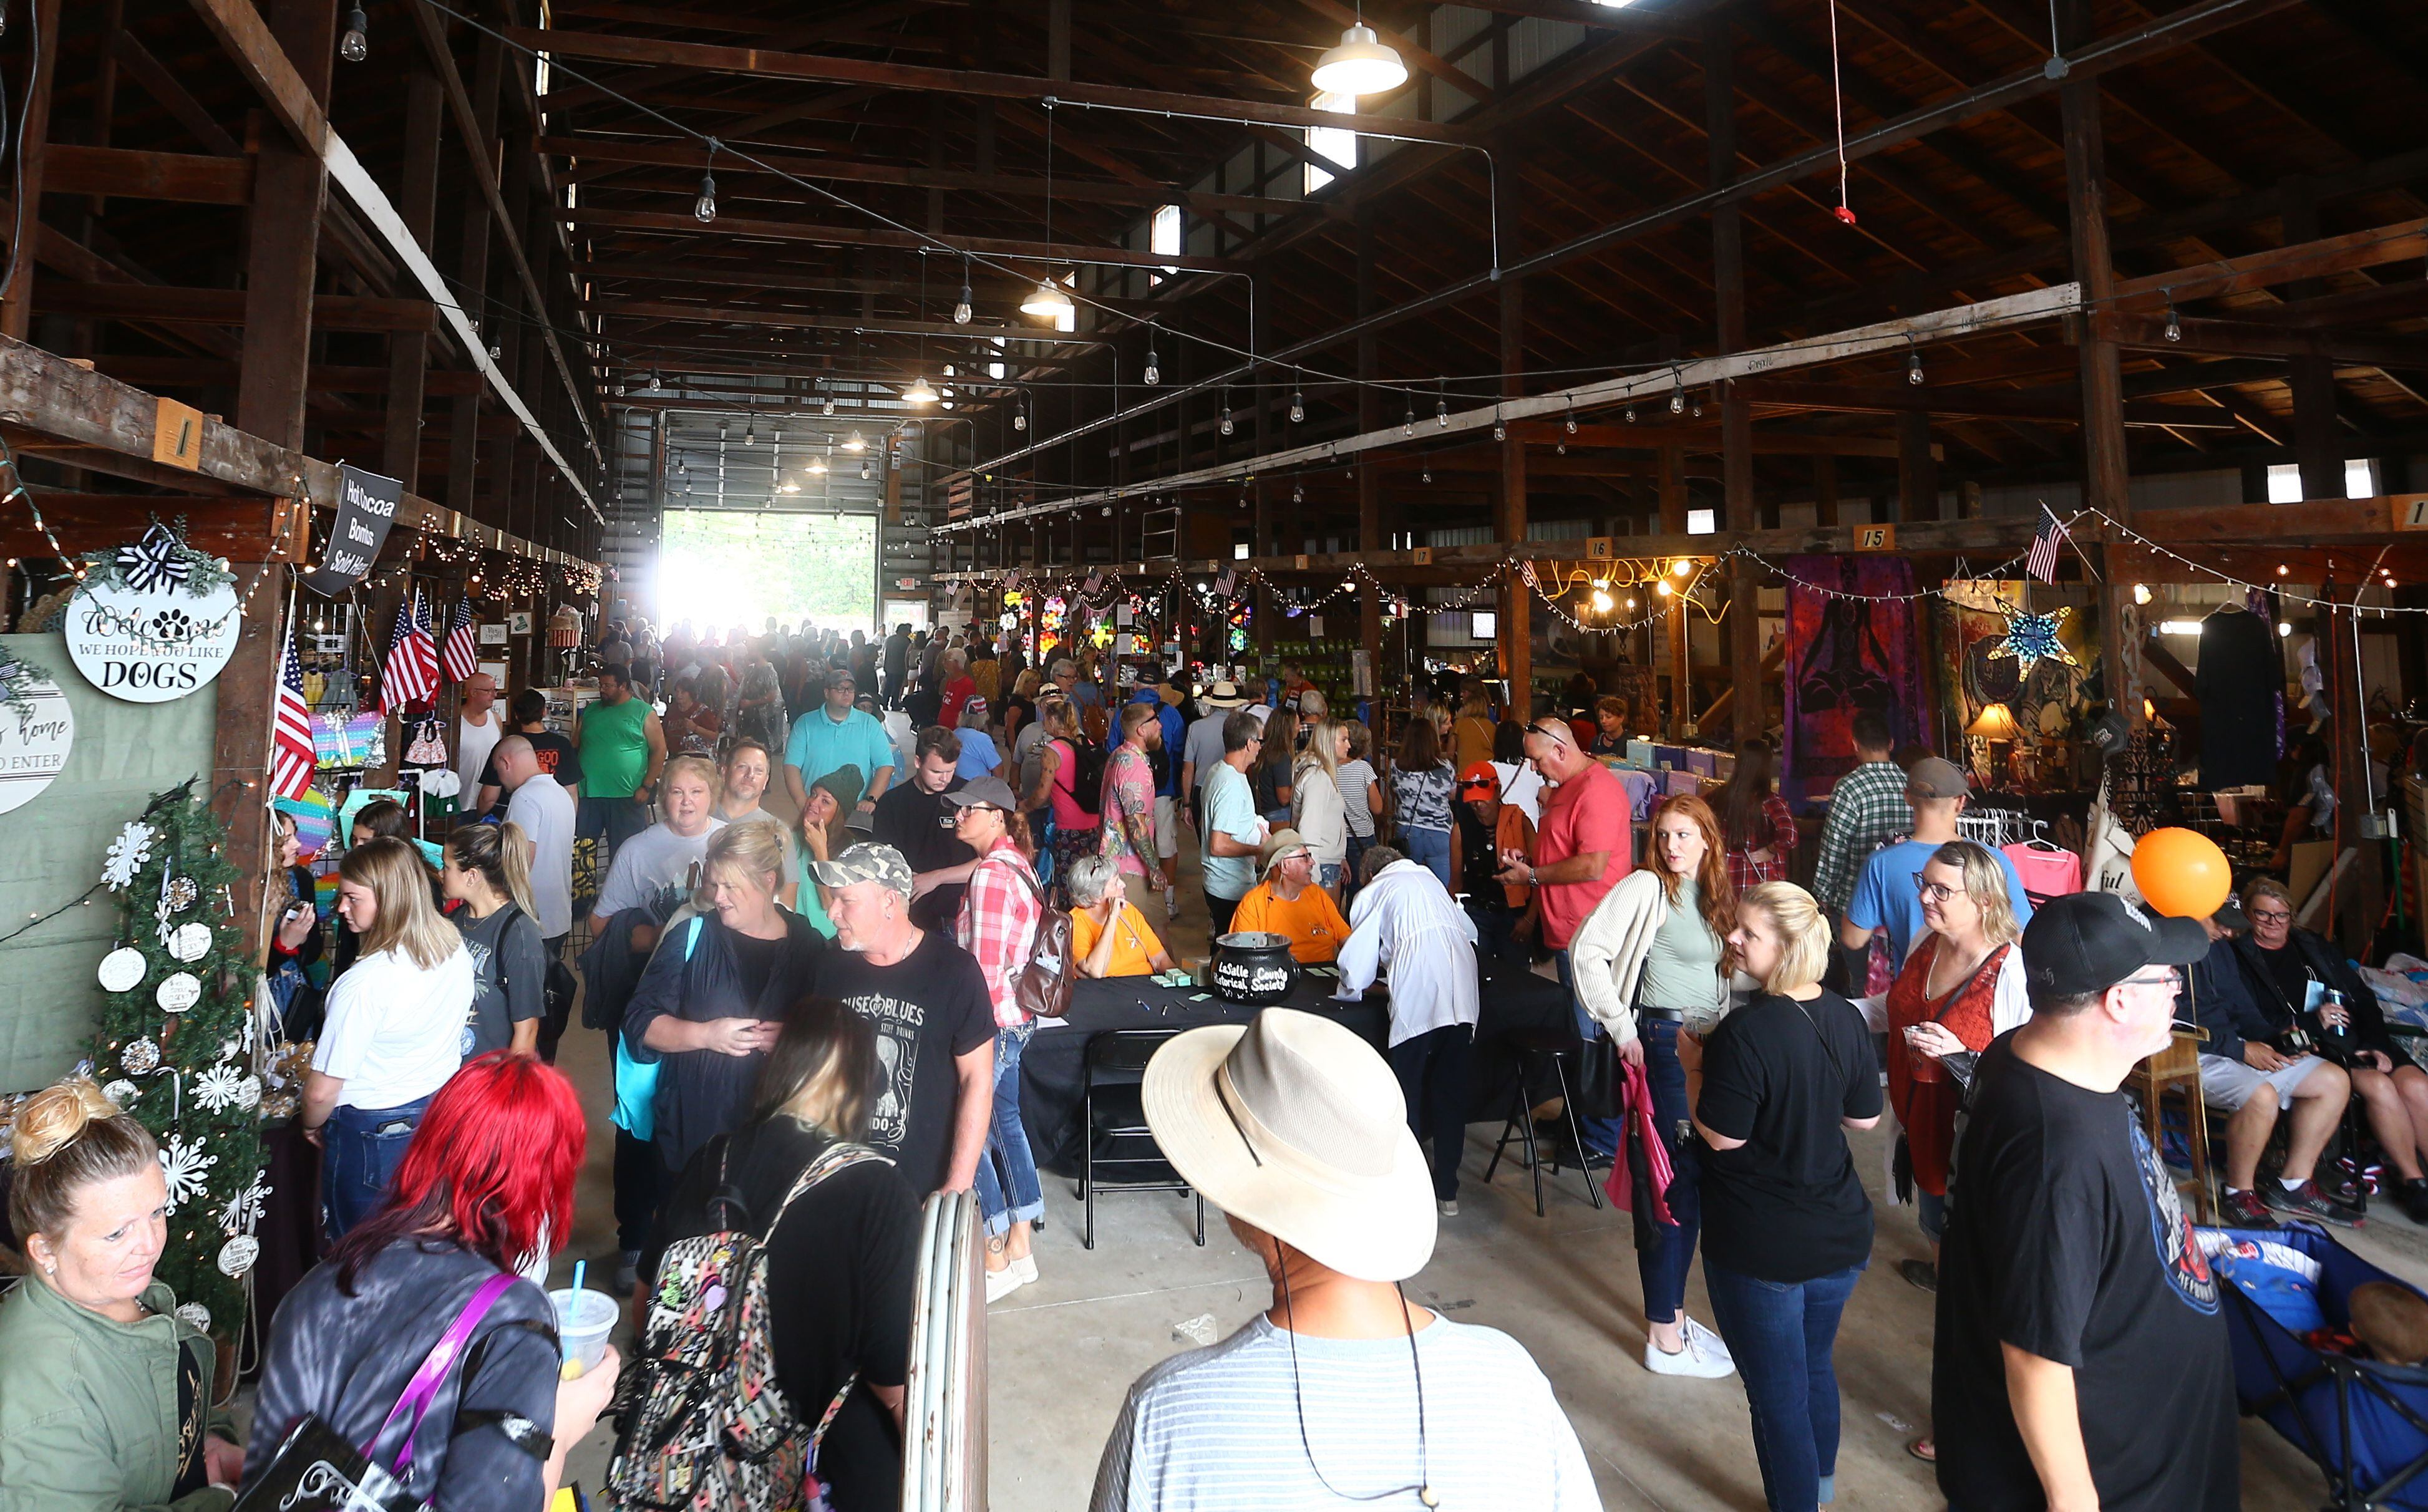 People gather inside the Canal Market building for the 51st annual Burgoo festival on Sunday Oct. 10, 2021.